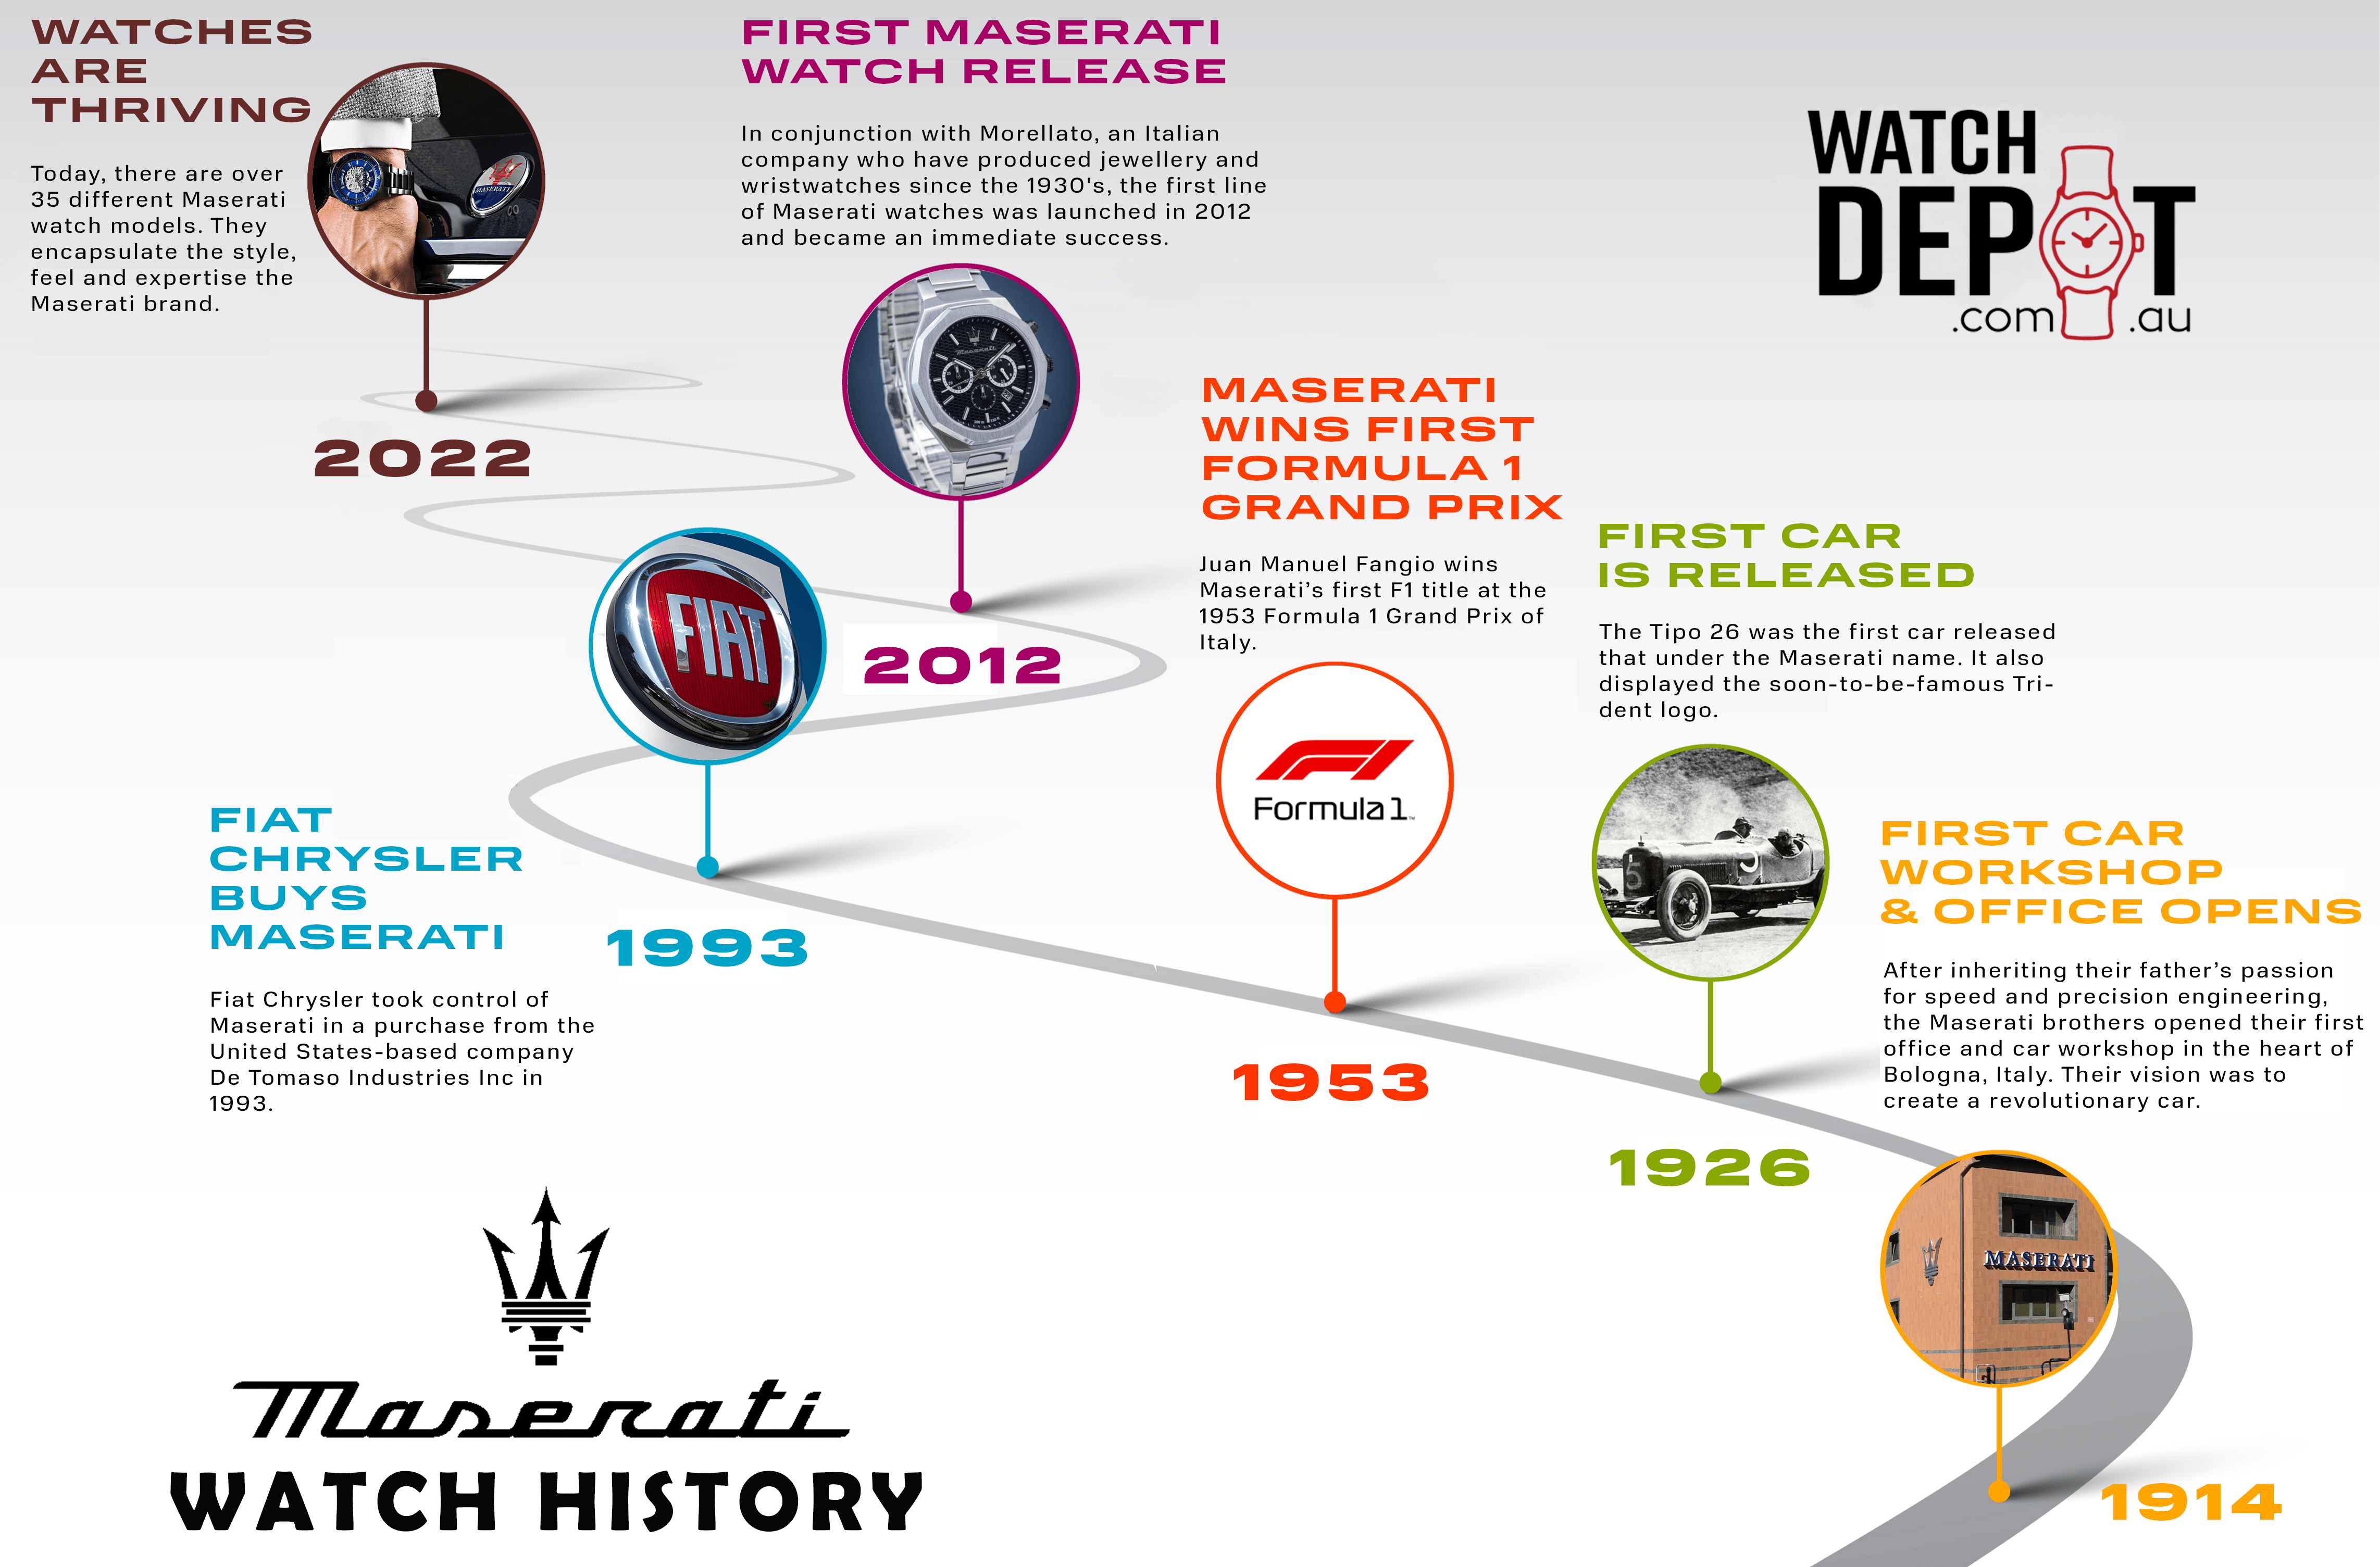 A history of maserati watches through a timeline